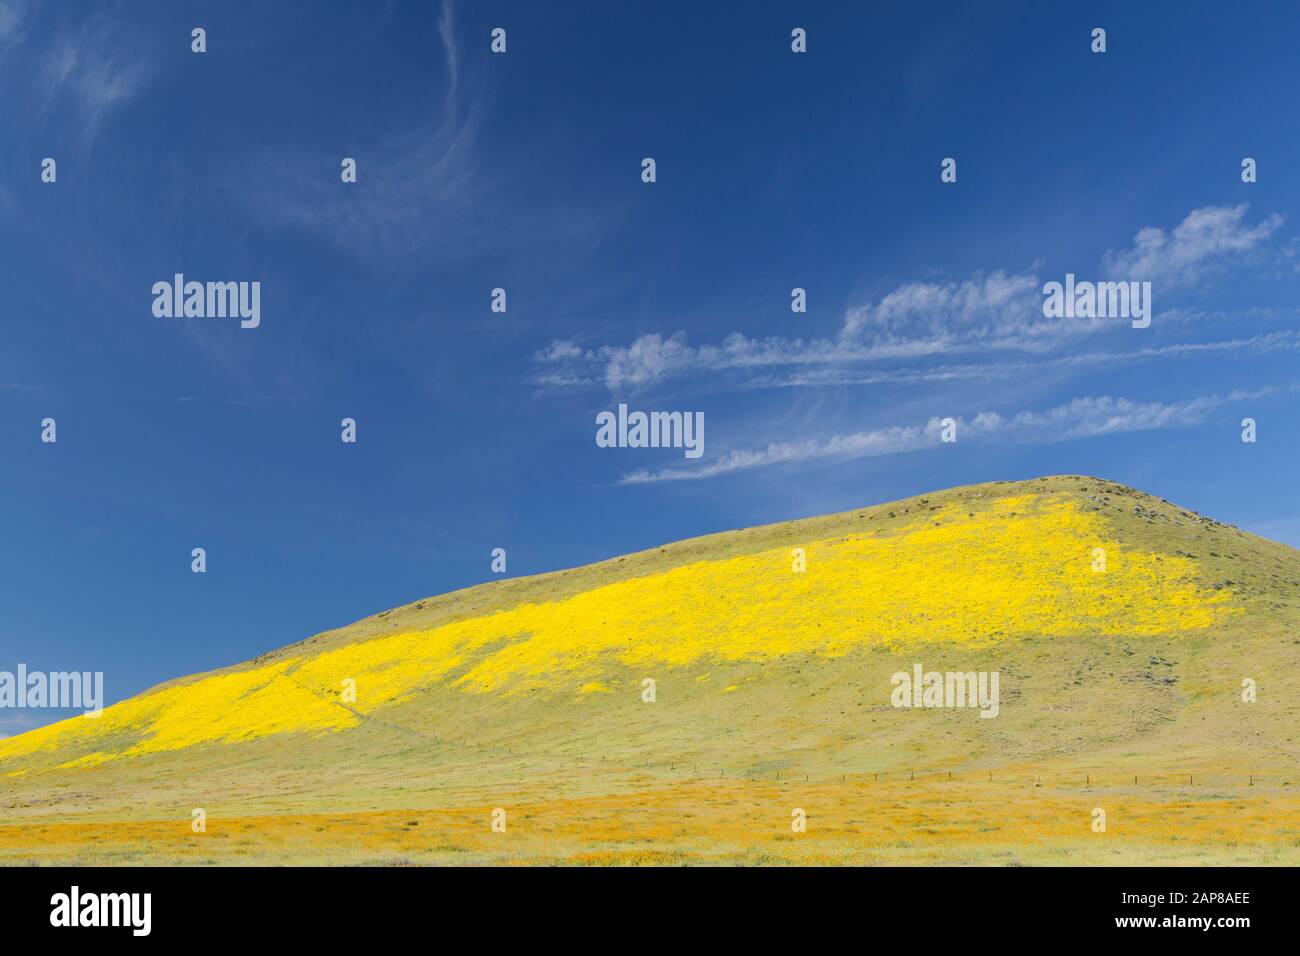 Wildflowers blooming during 2019 Superbloom in Carrizo Plain National Monument Stock Photo